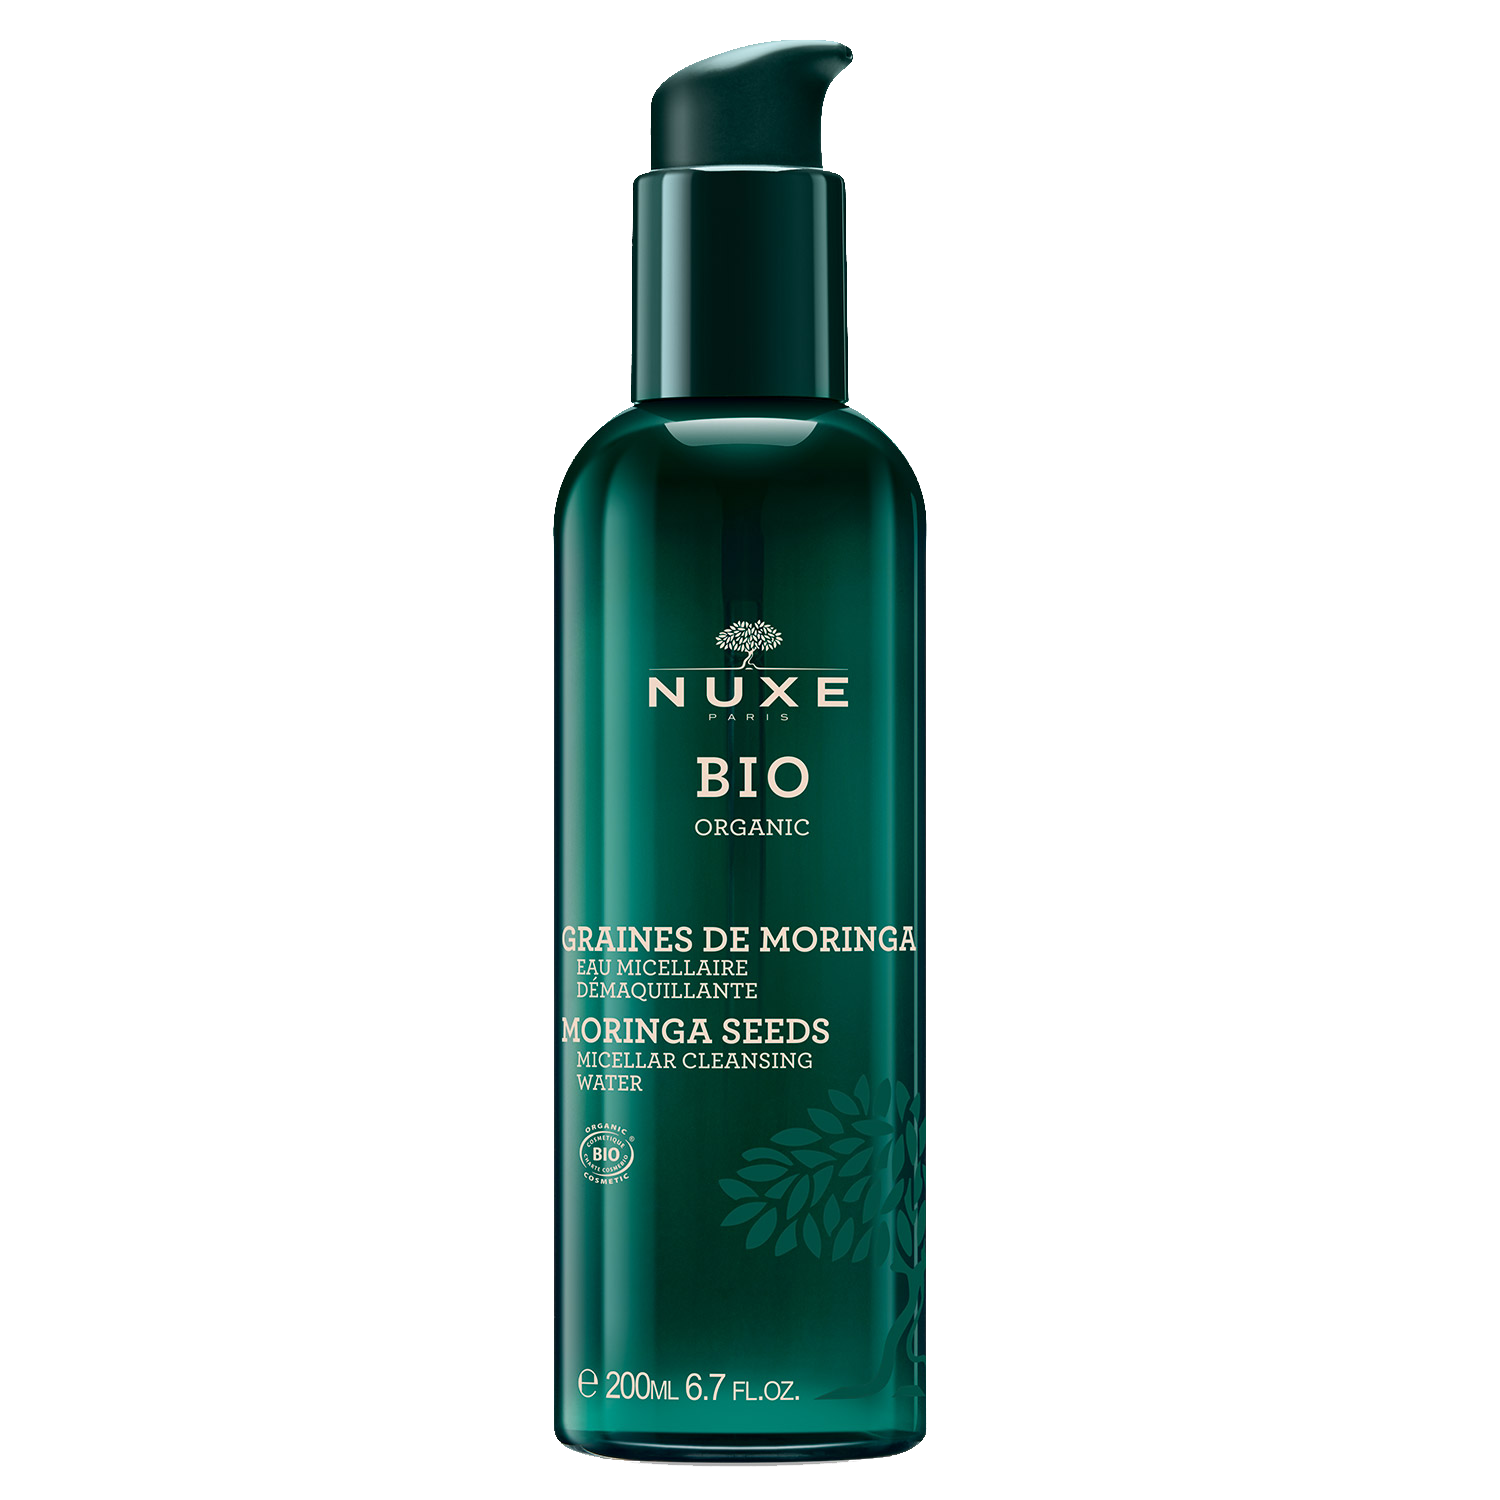 NUXE Organic Micellar Cleansing Water NUXE Organic Micellar Cleansing Water 1